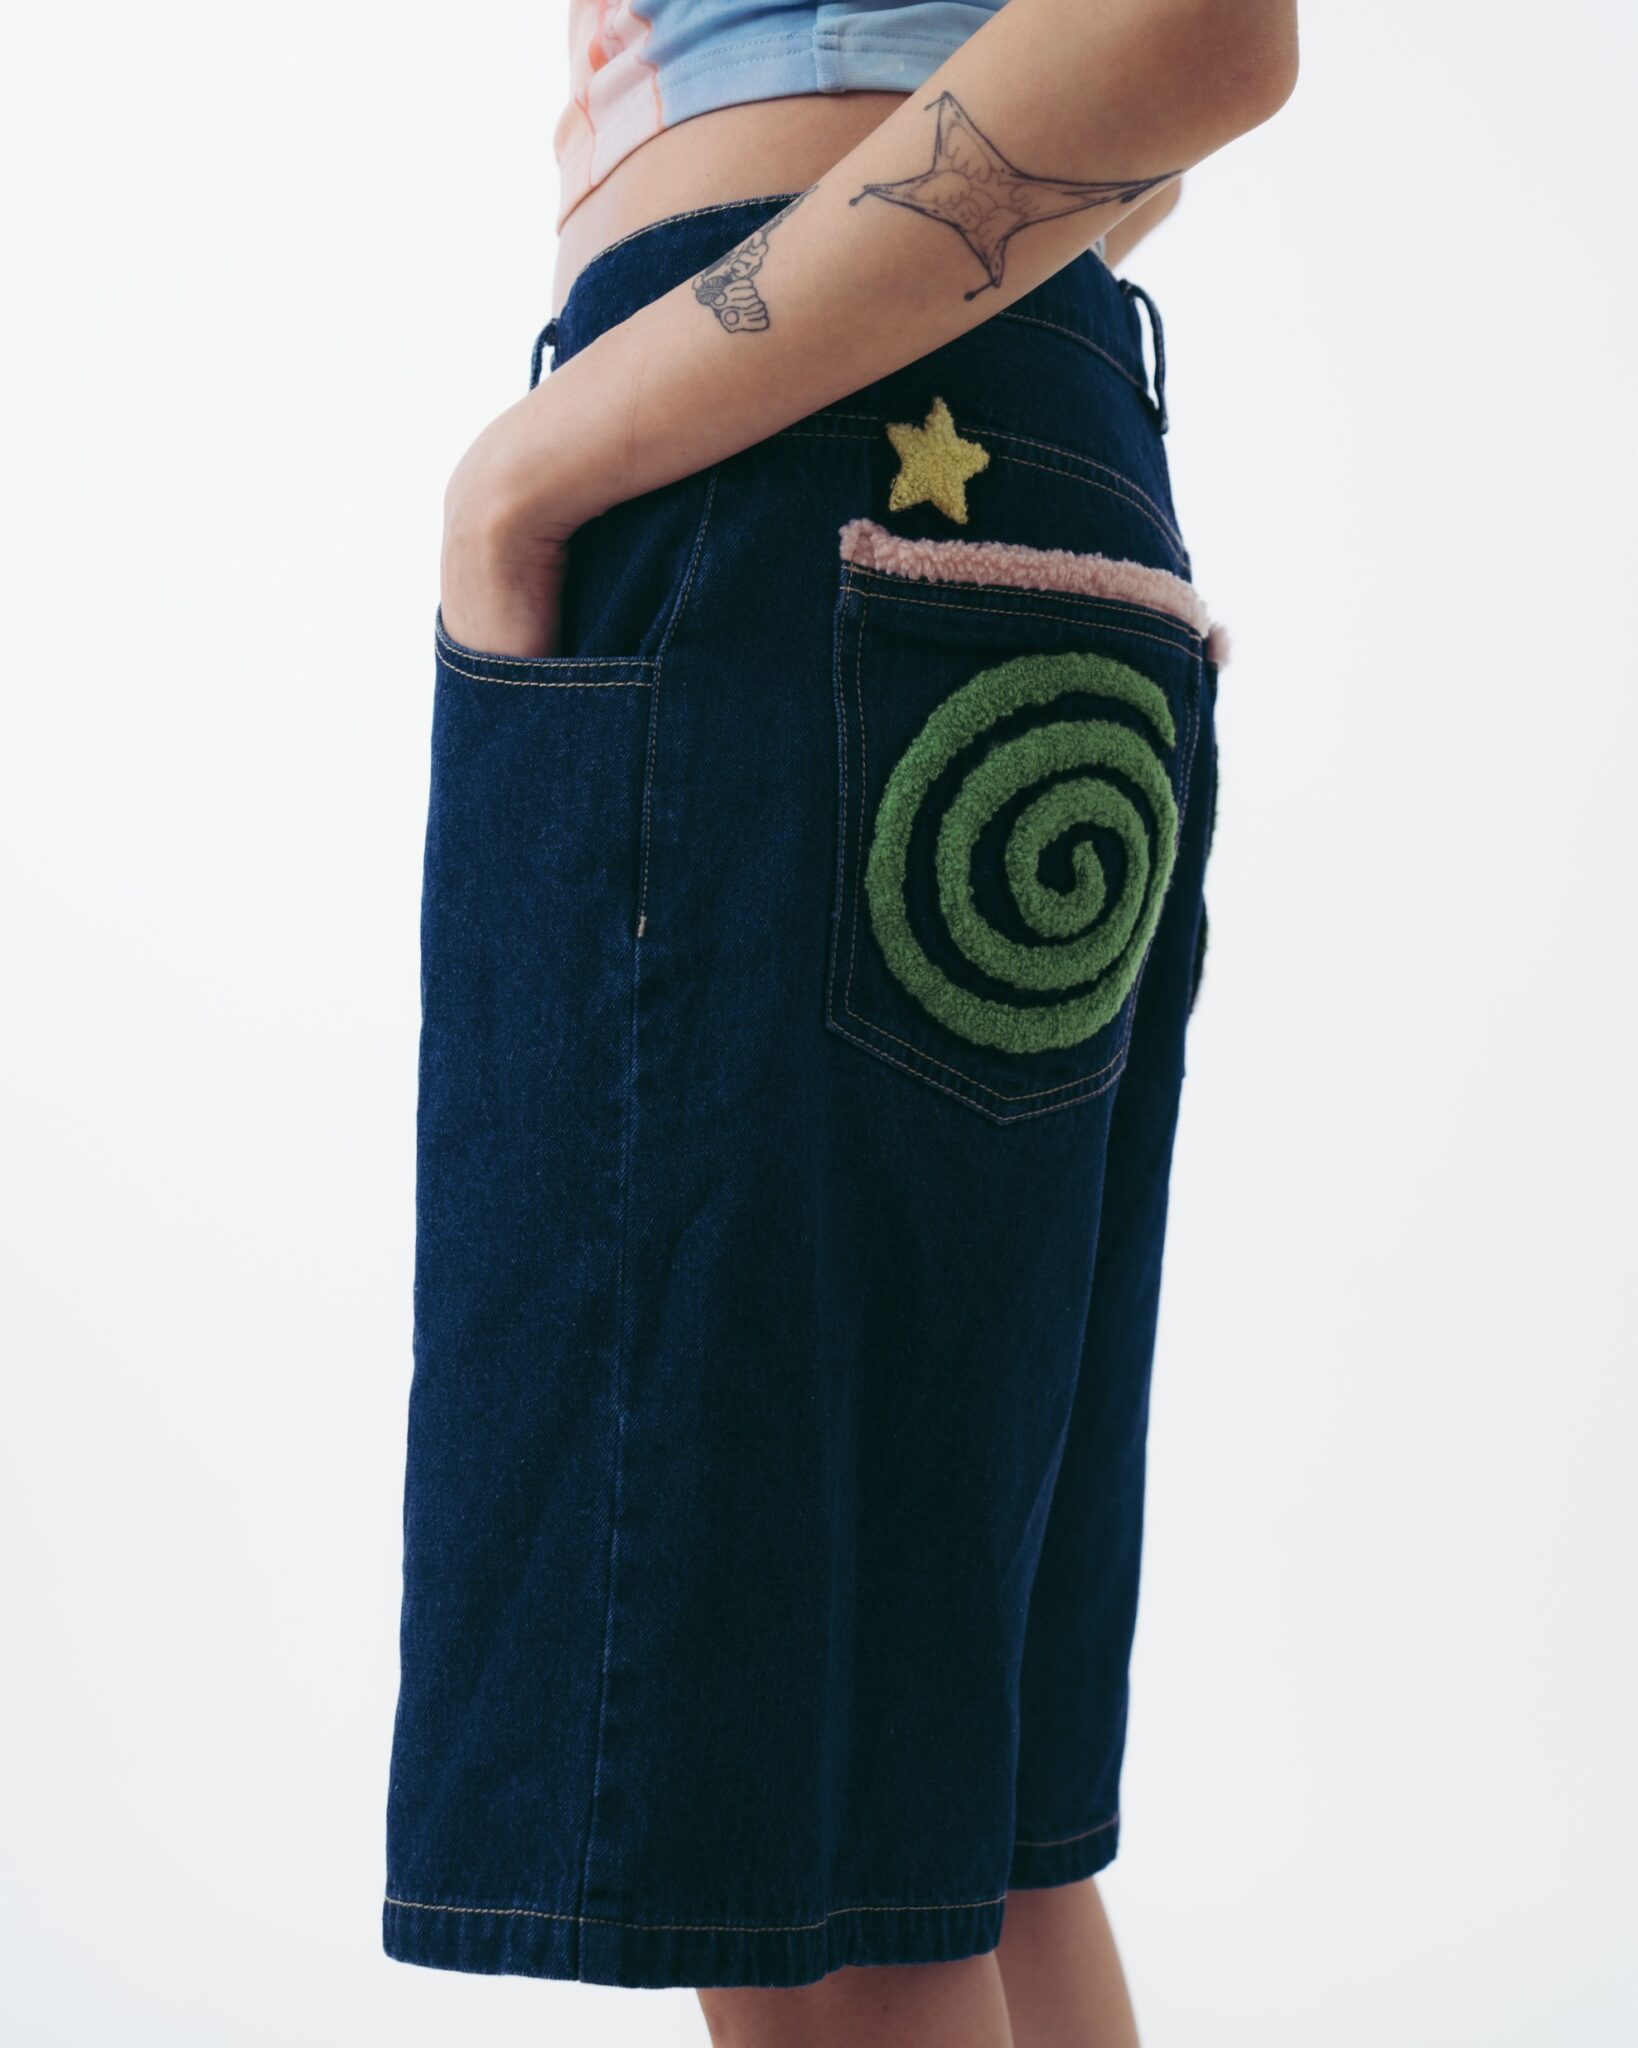 Altered Jeans: Adding 3 Darts to the back Waist - JuJu Vail